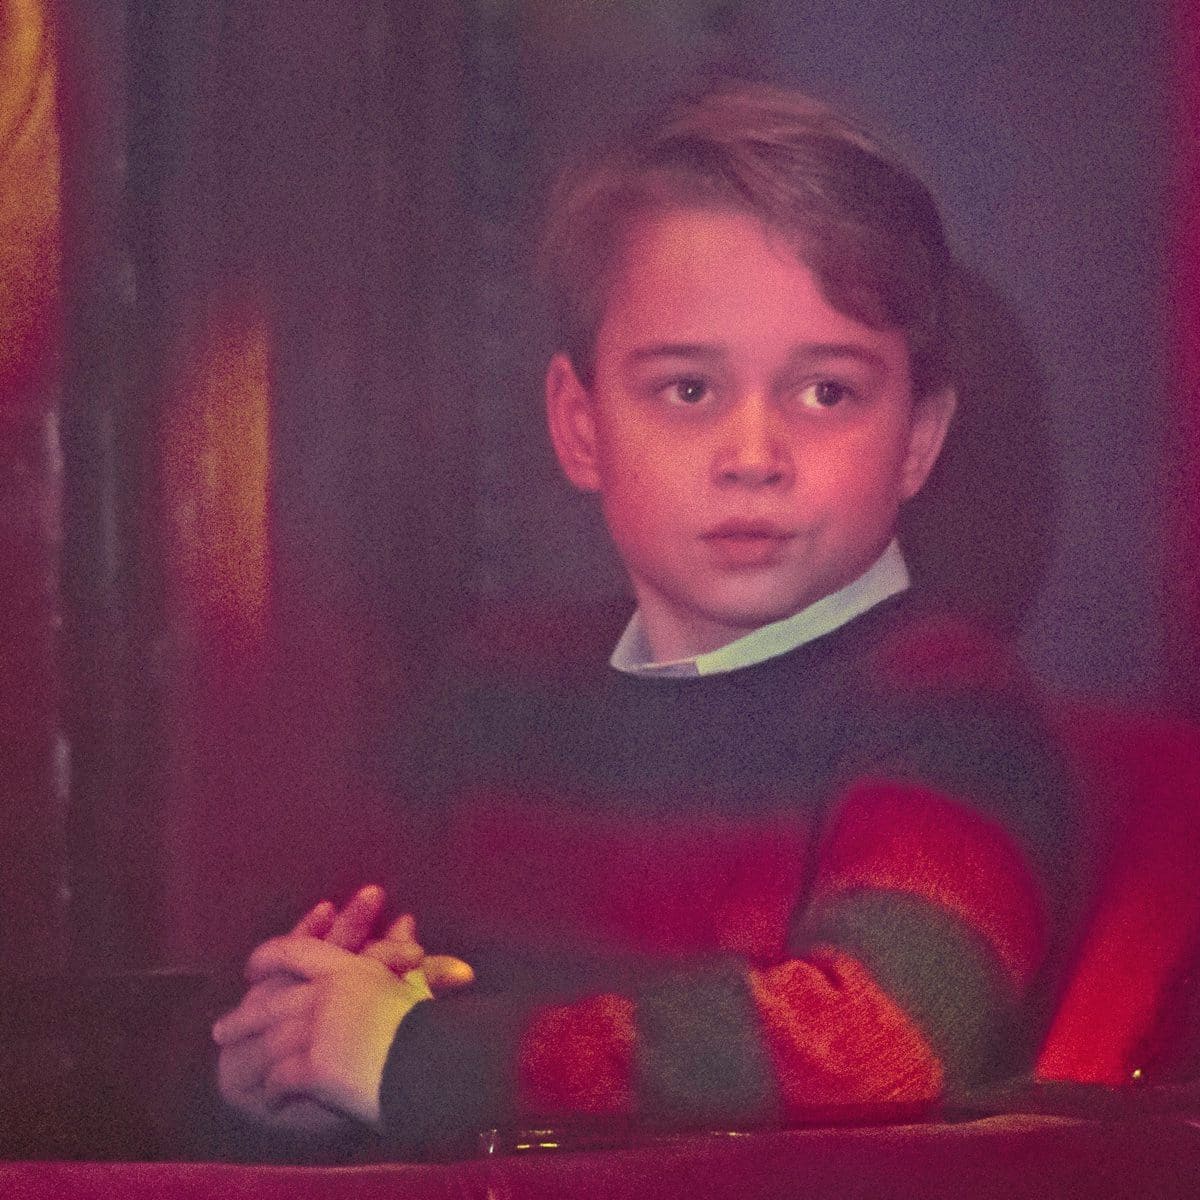 Future King Prince George looked comfortable in his seat.